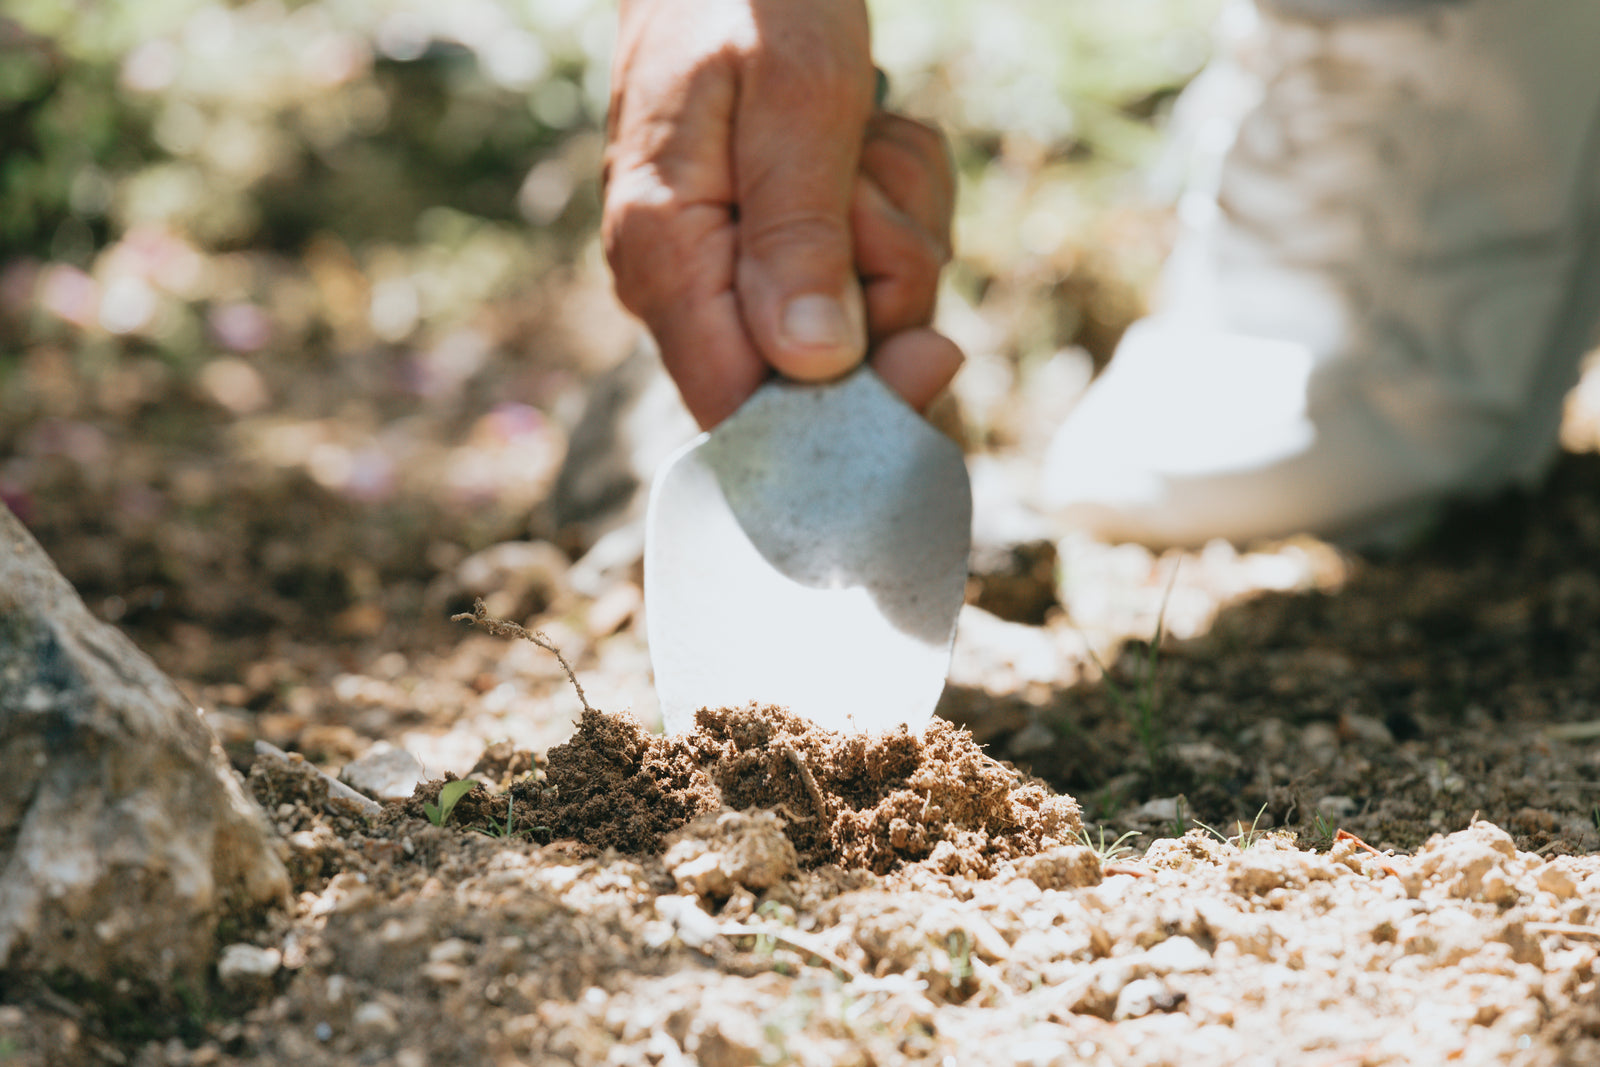 photo of a hand holding a small gardening shovel digging into dirt